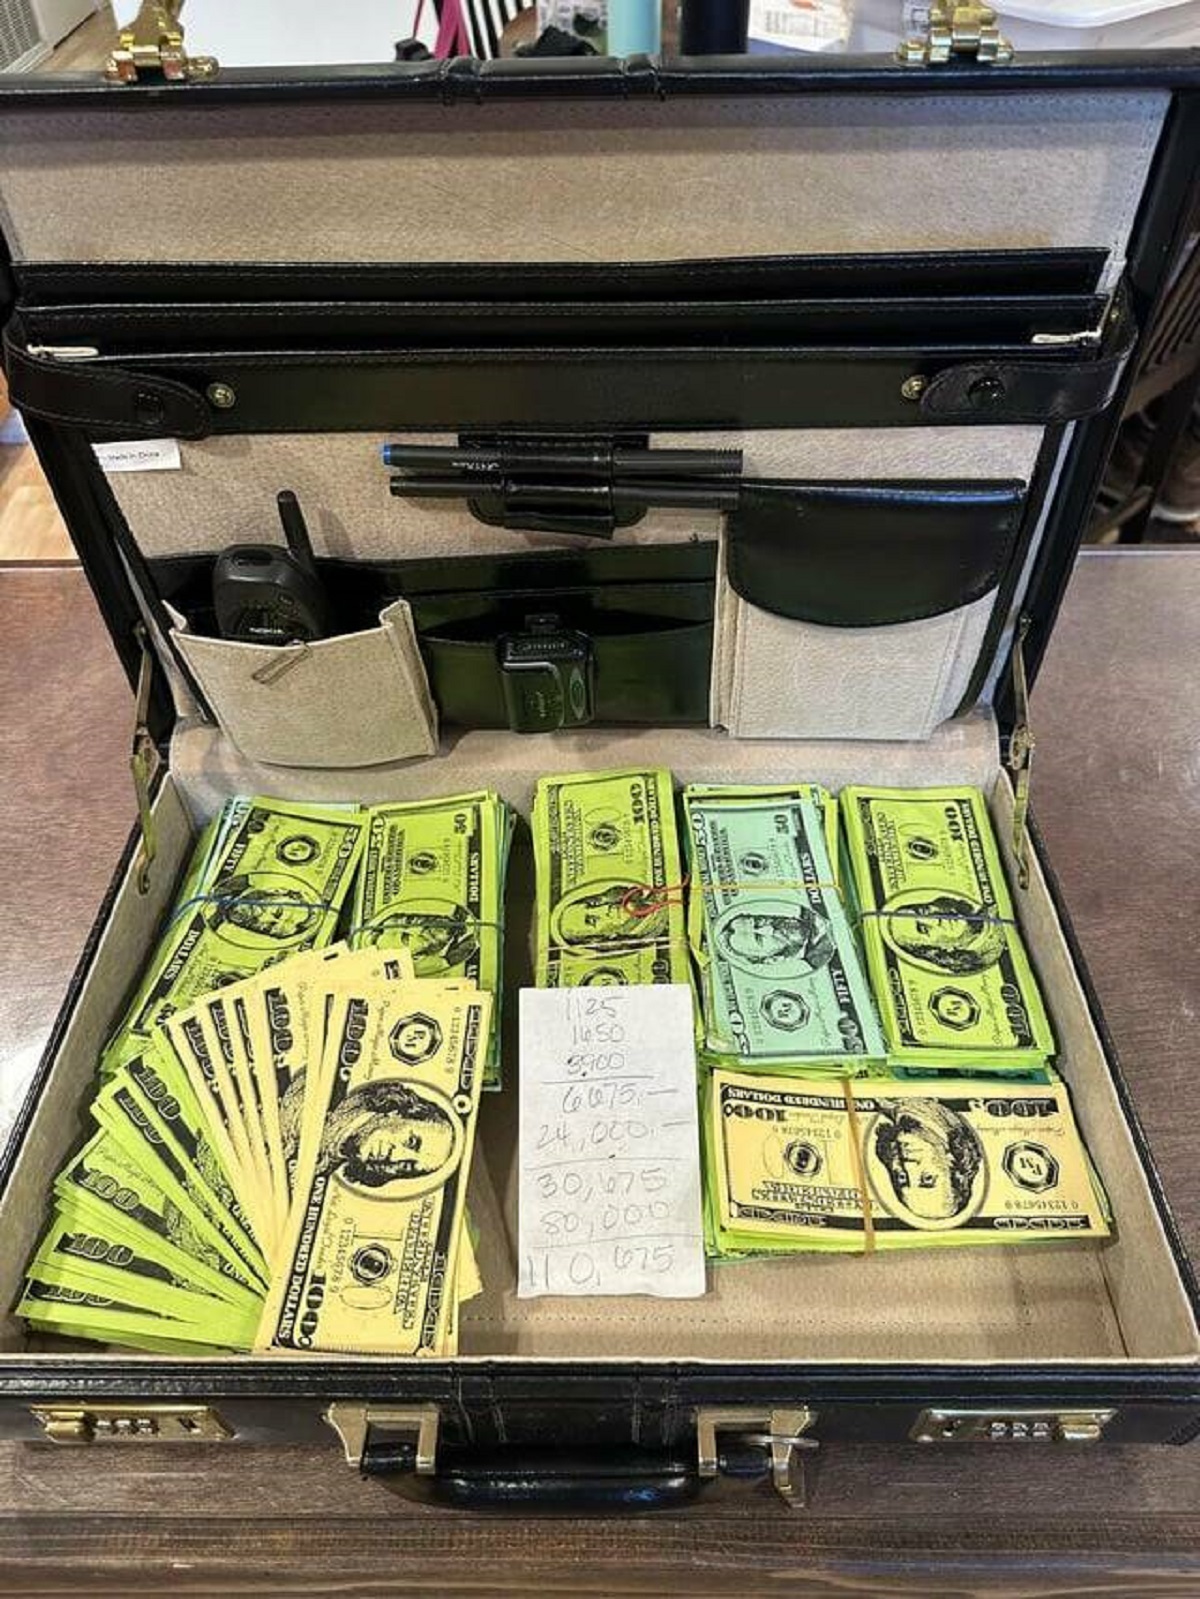 "My briefcase containing $110,675 in “class cash” from back in 6th grade…21 years ago…"